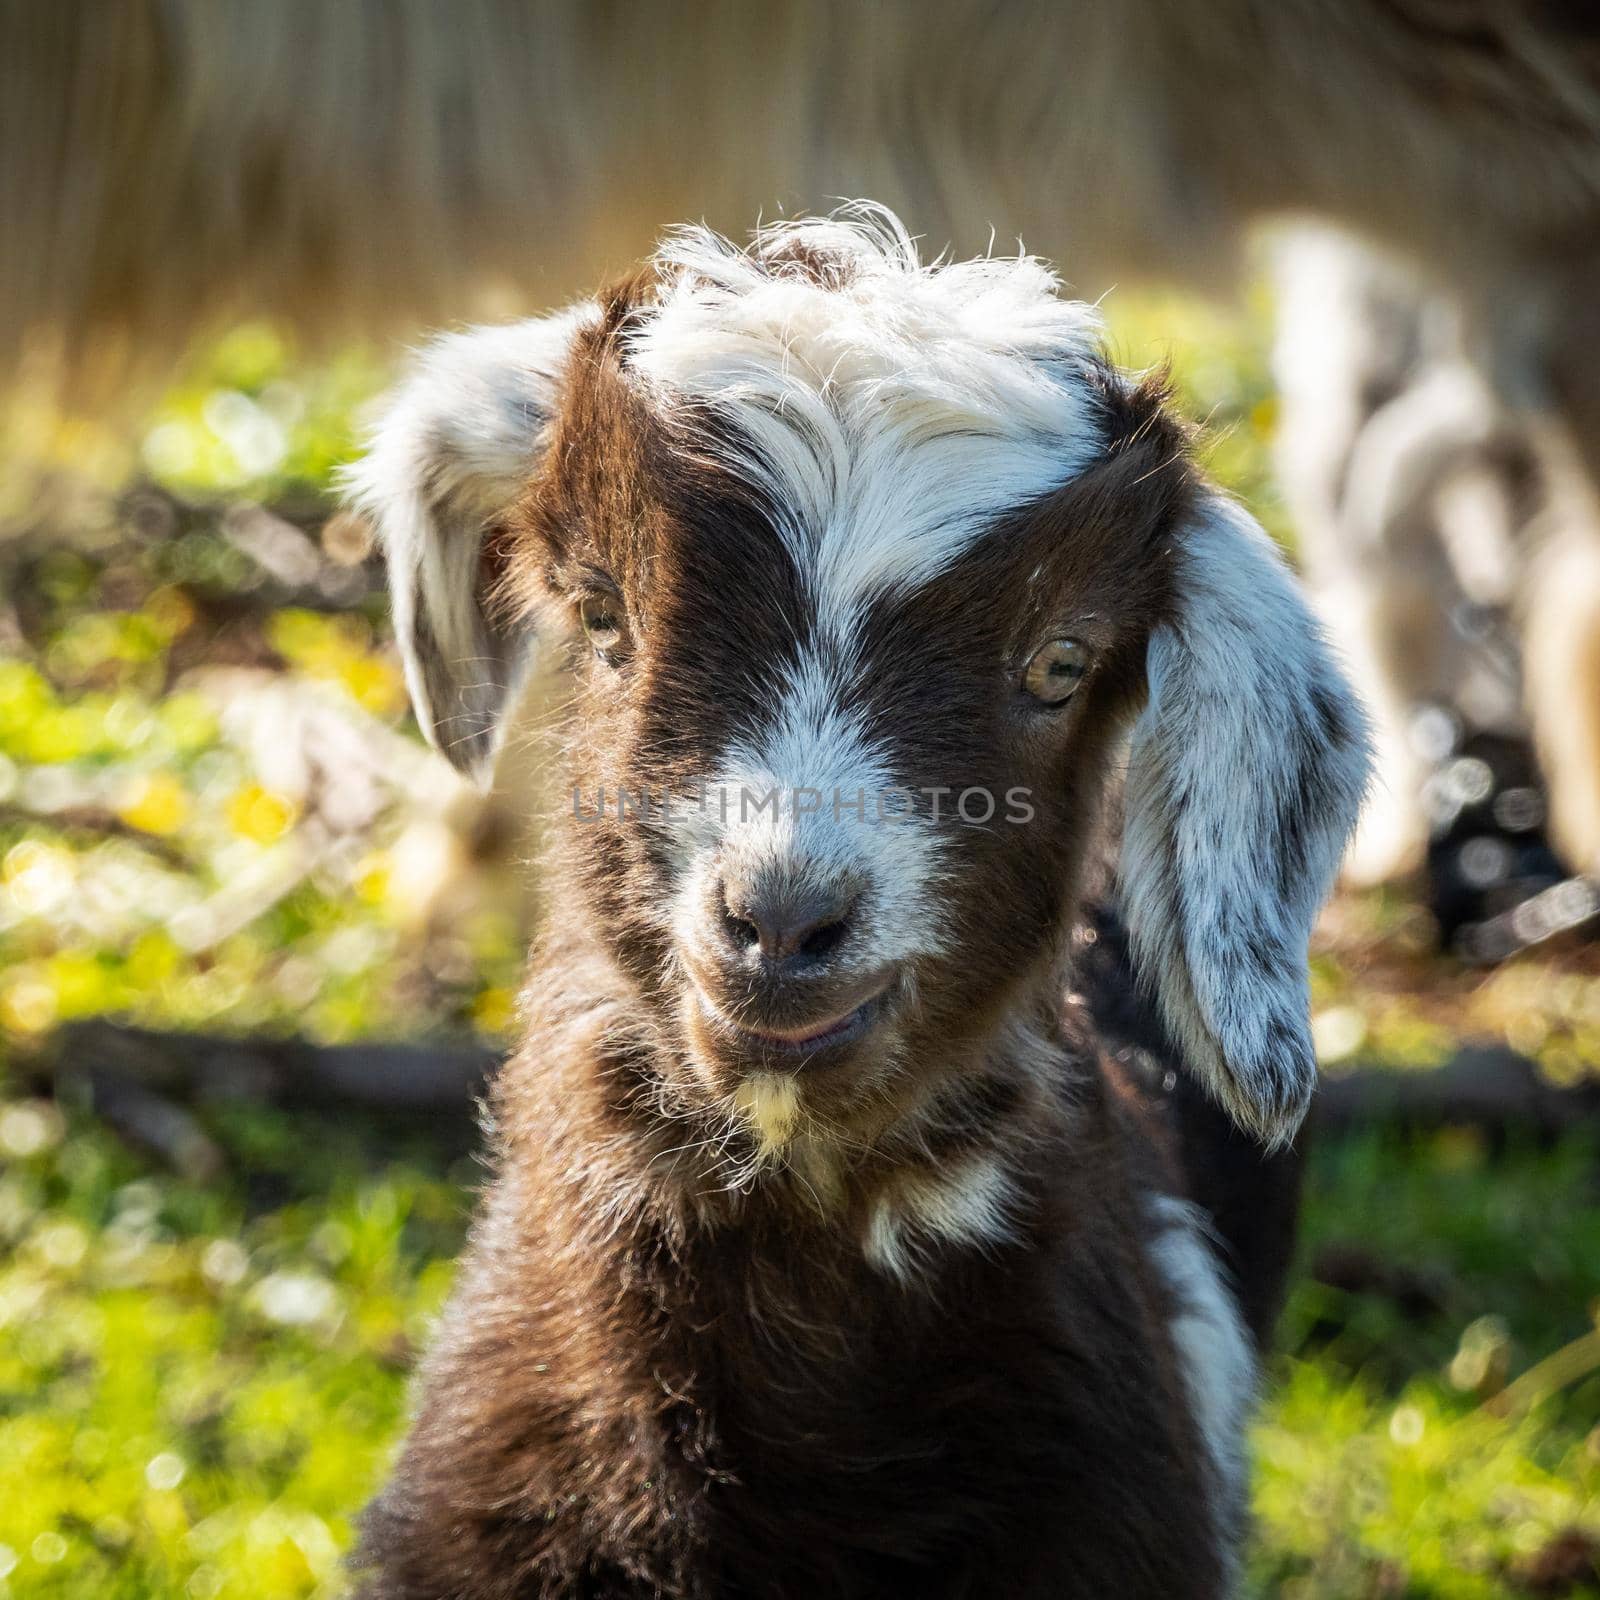 Baby goat portrait, brown and white fur